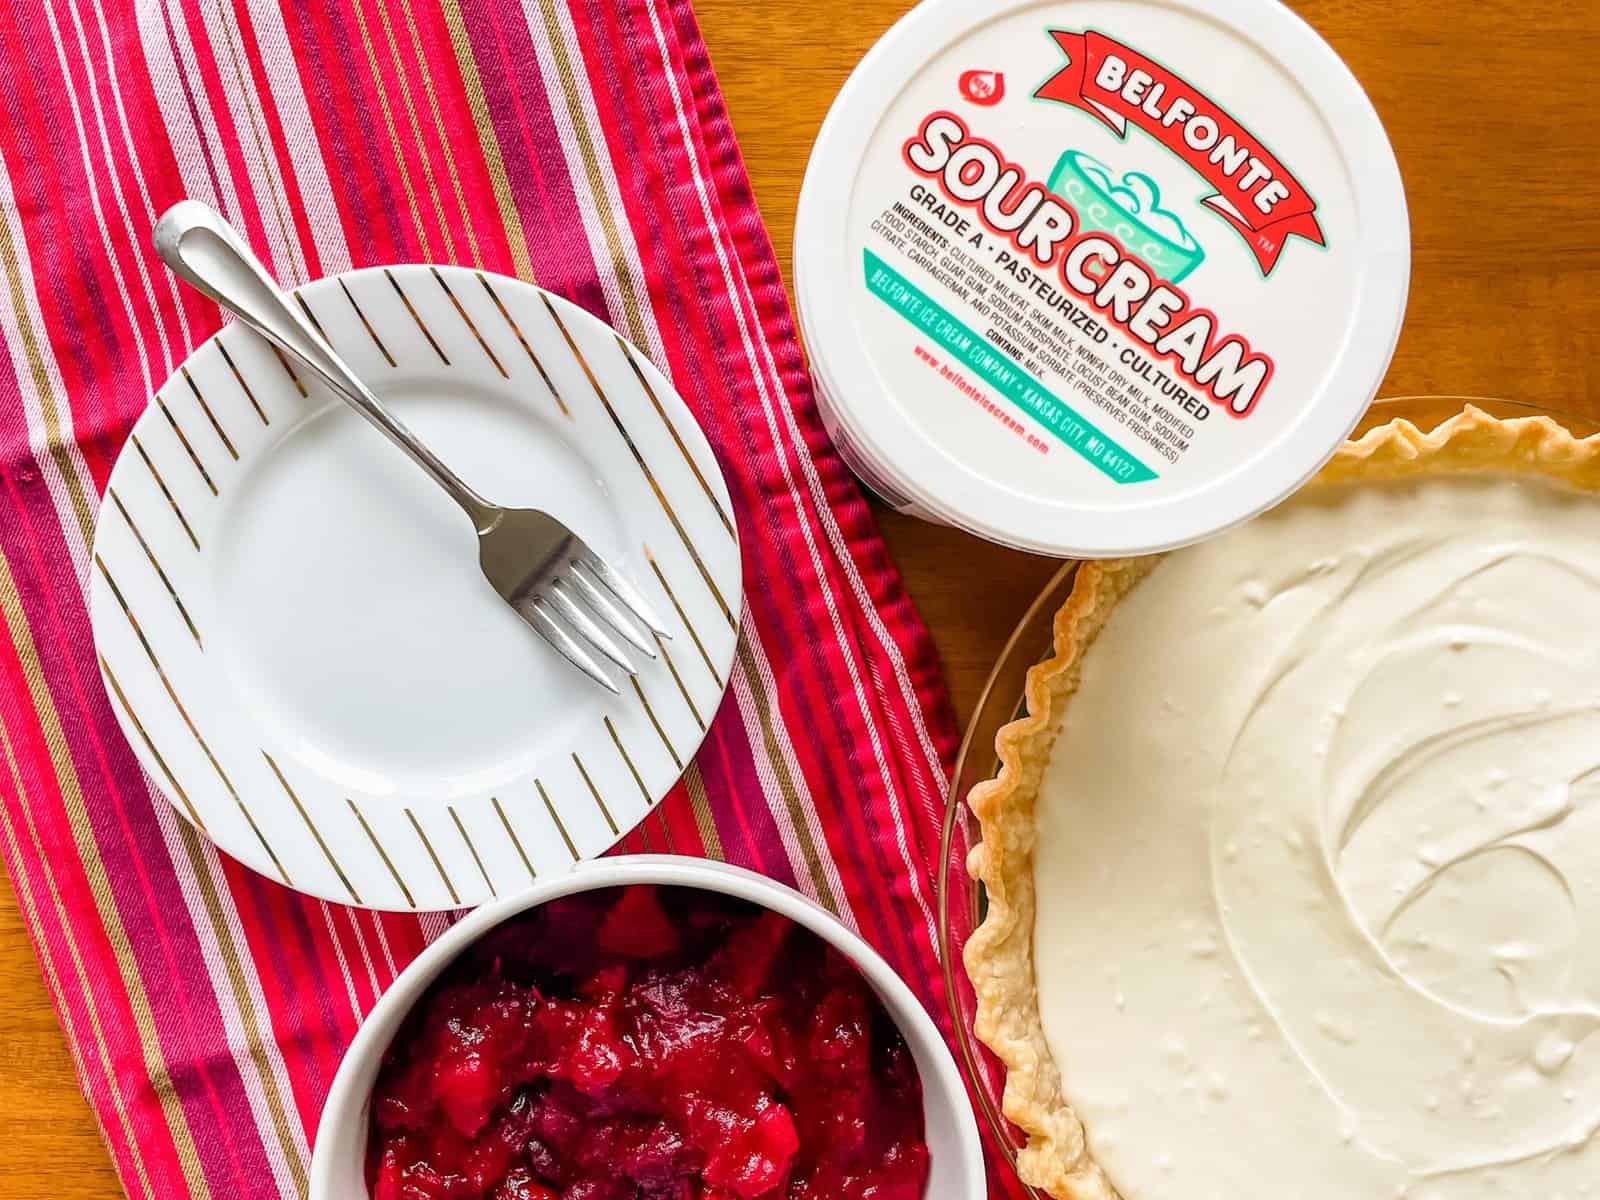  Get ready to sink your fork into this delicious sour cream cranberry pie 🥧